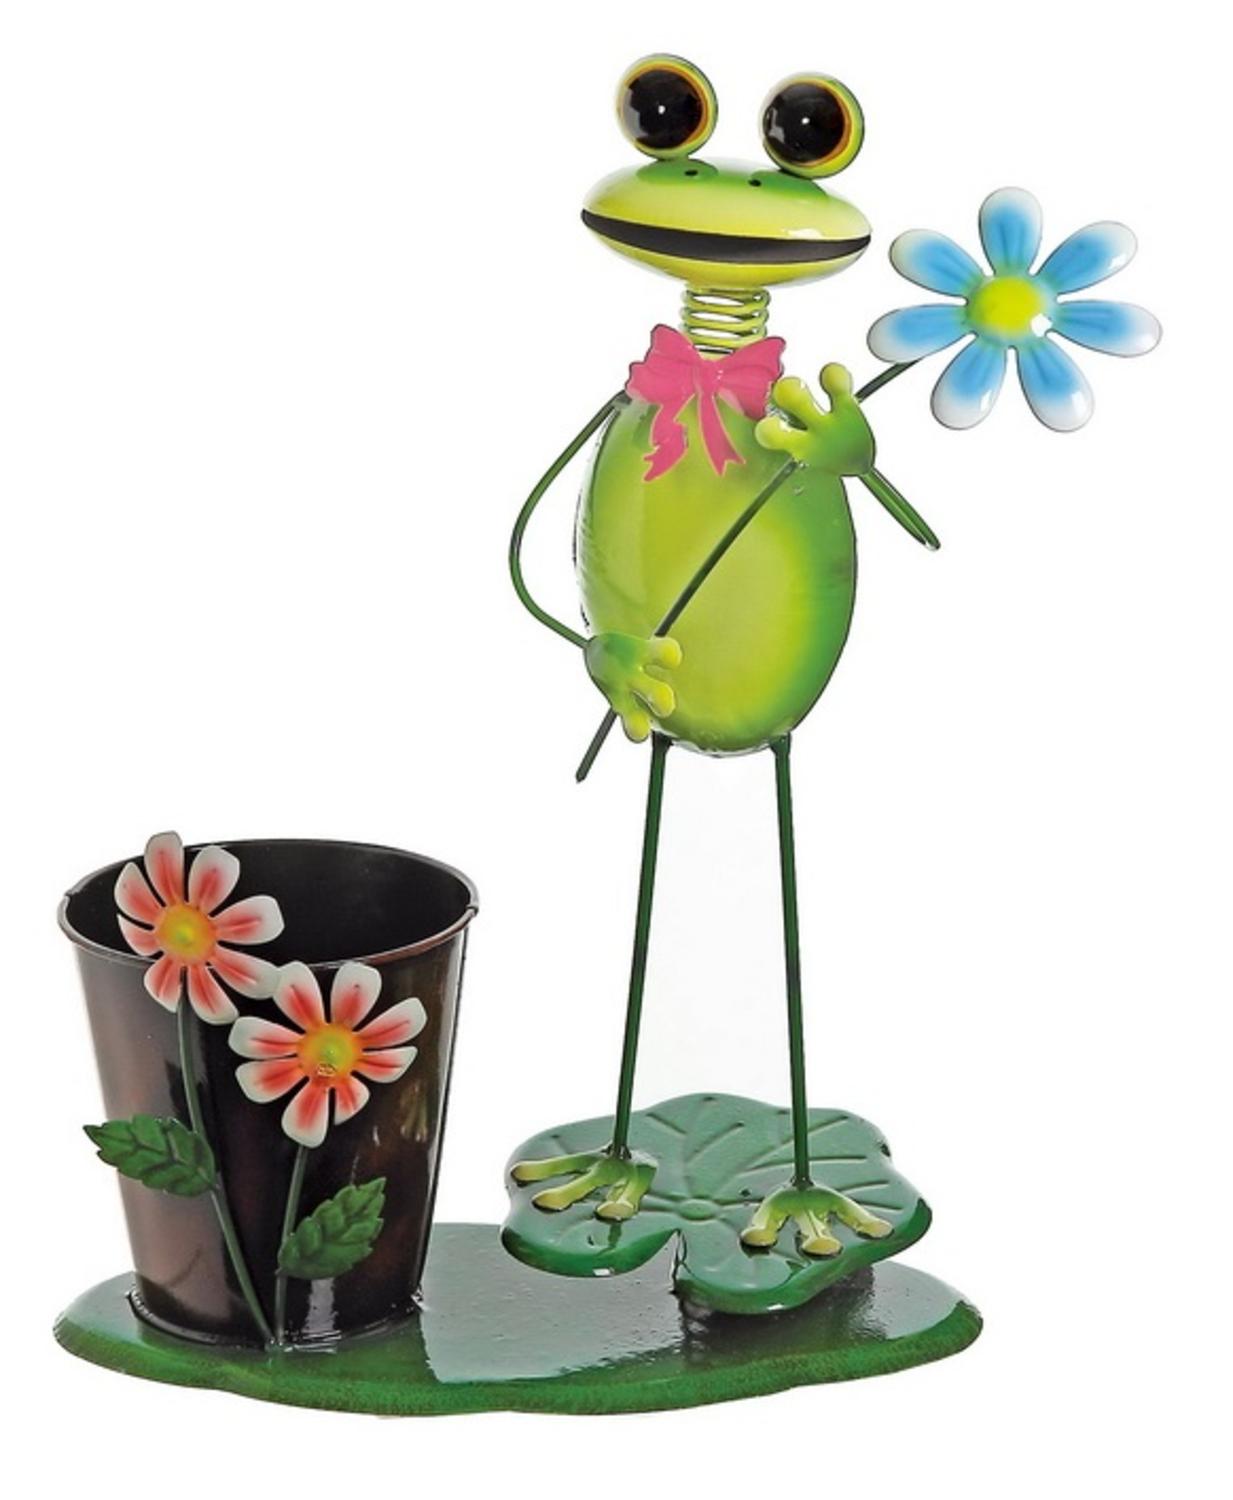 15" Green Frog With Flowers on a Lily Pad Decorative Spring Outdoor Garden Planter - image 1 of 1